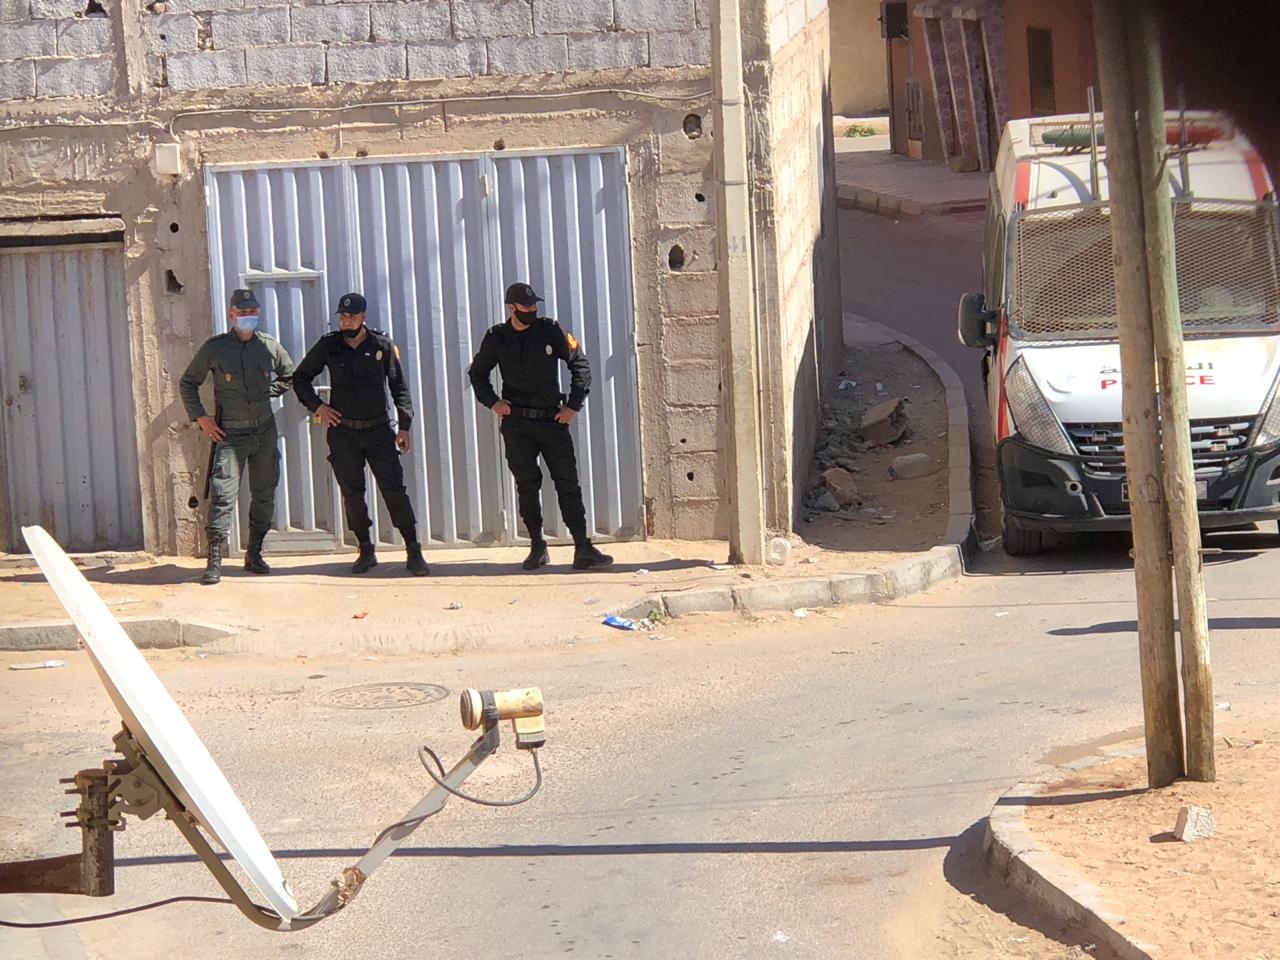 Security forces in the streets near Ahmed Ettanji's home (Equipe Media)